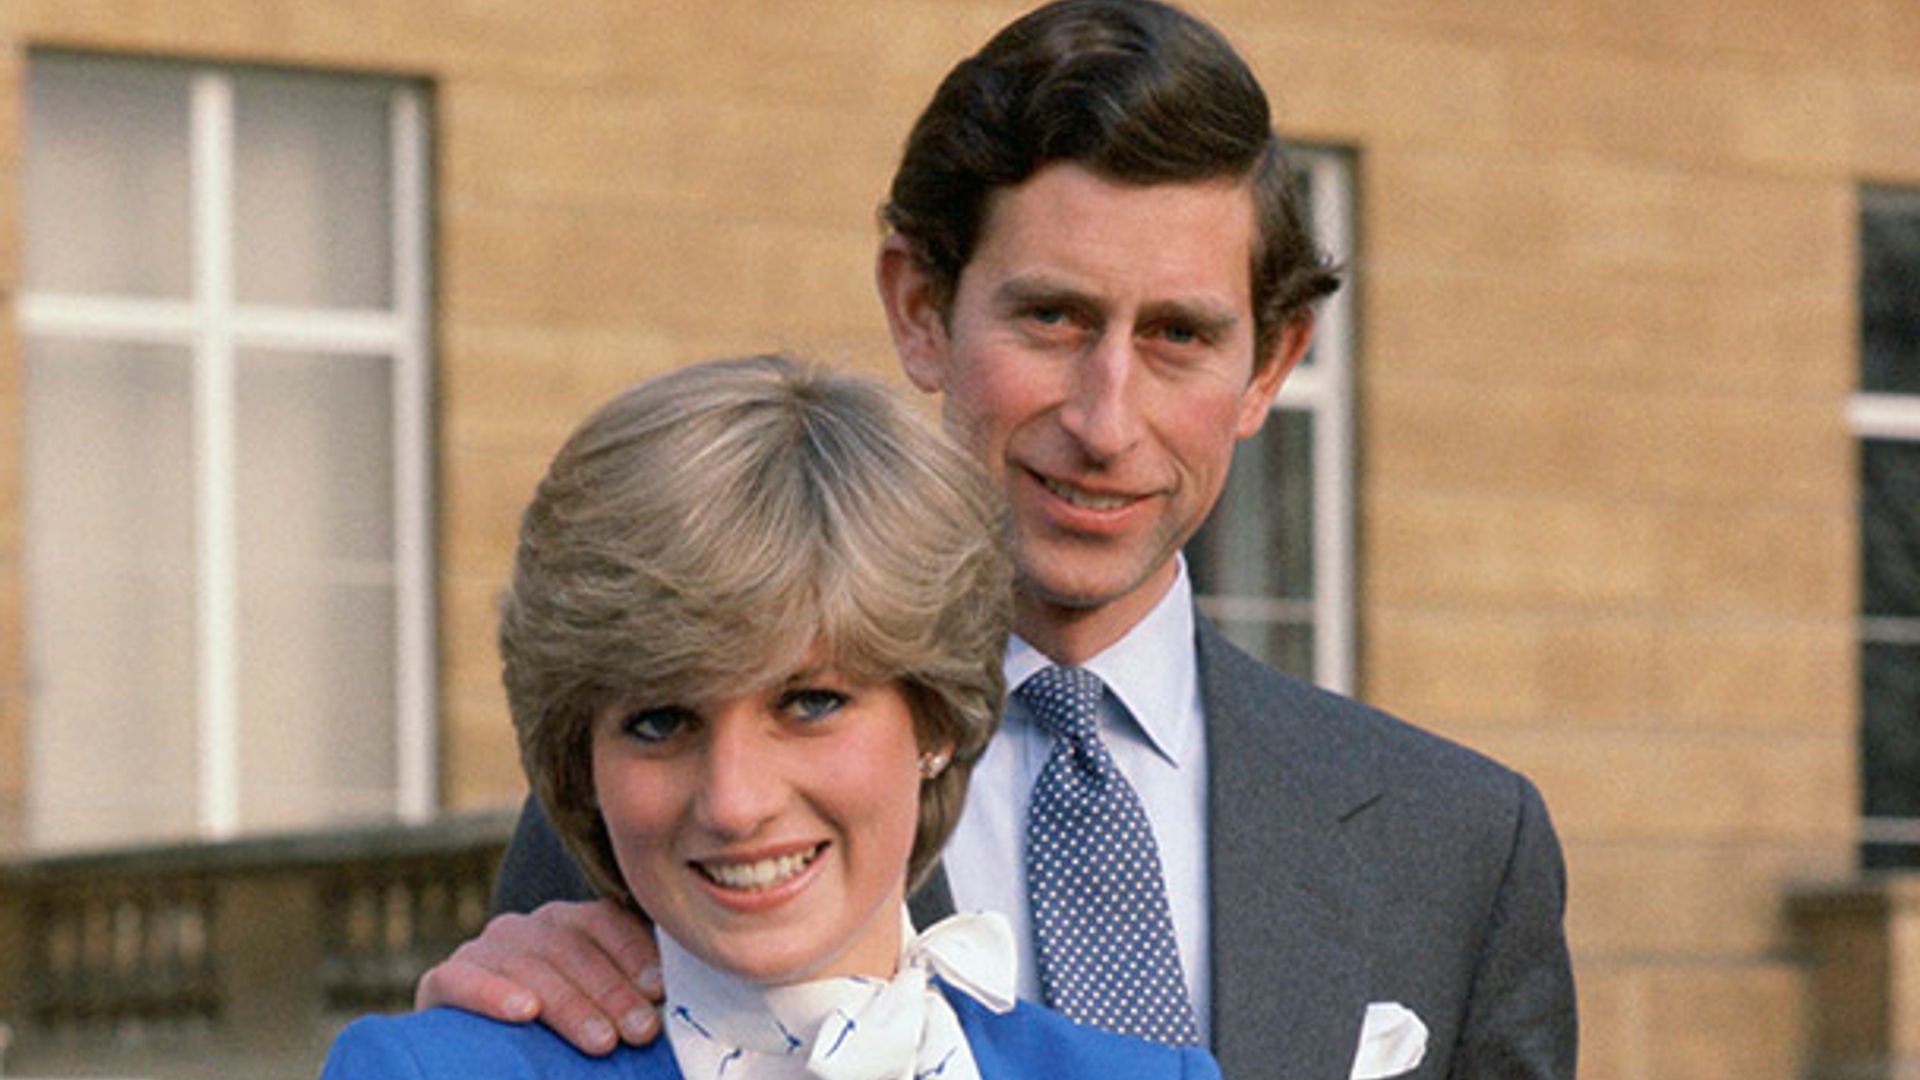 'The Crown' teases its recreation of Prince Charles and Princess Diana's engagement in new photos